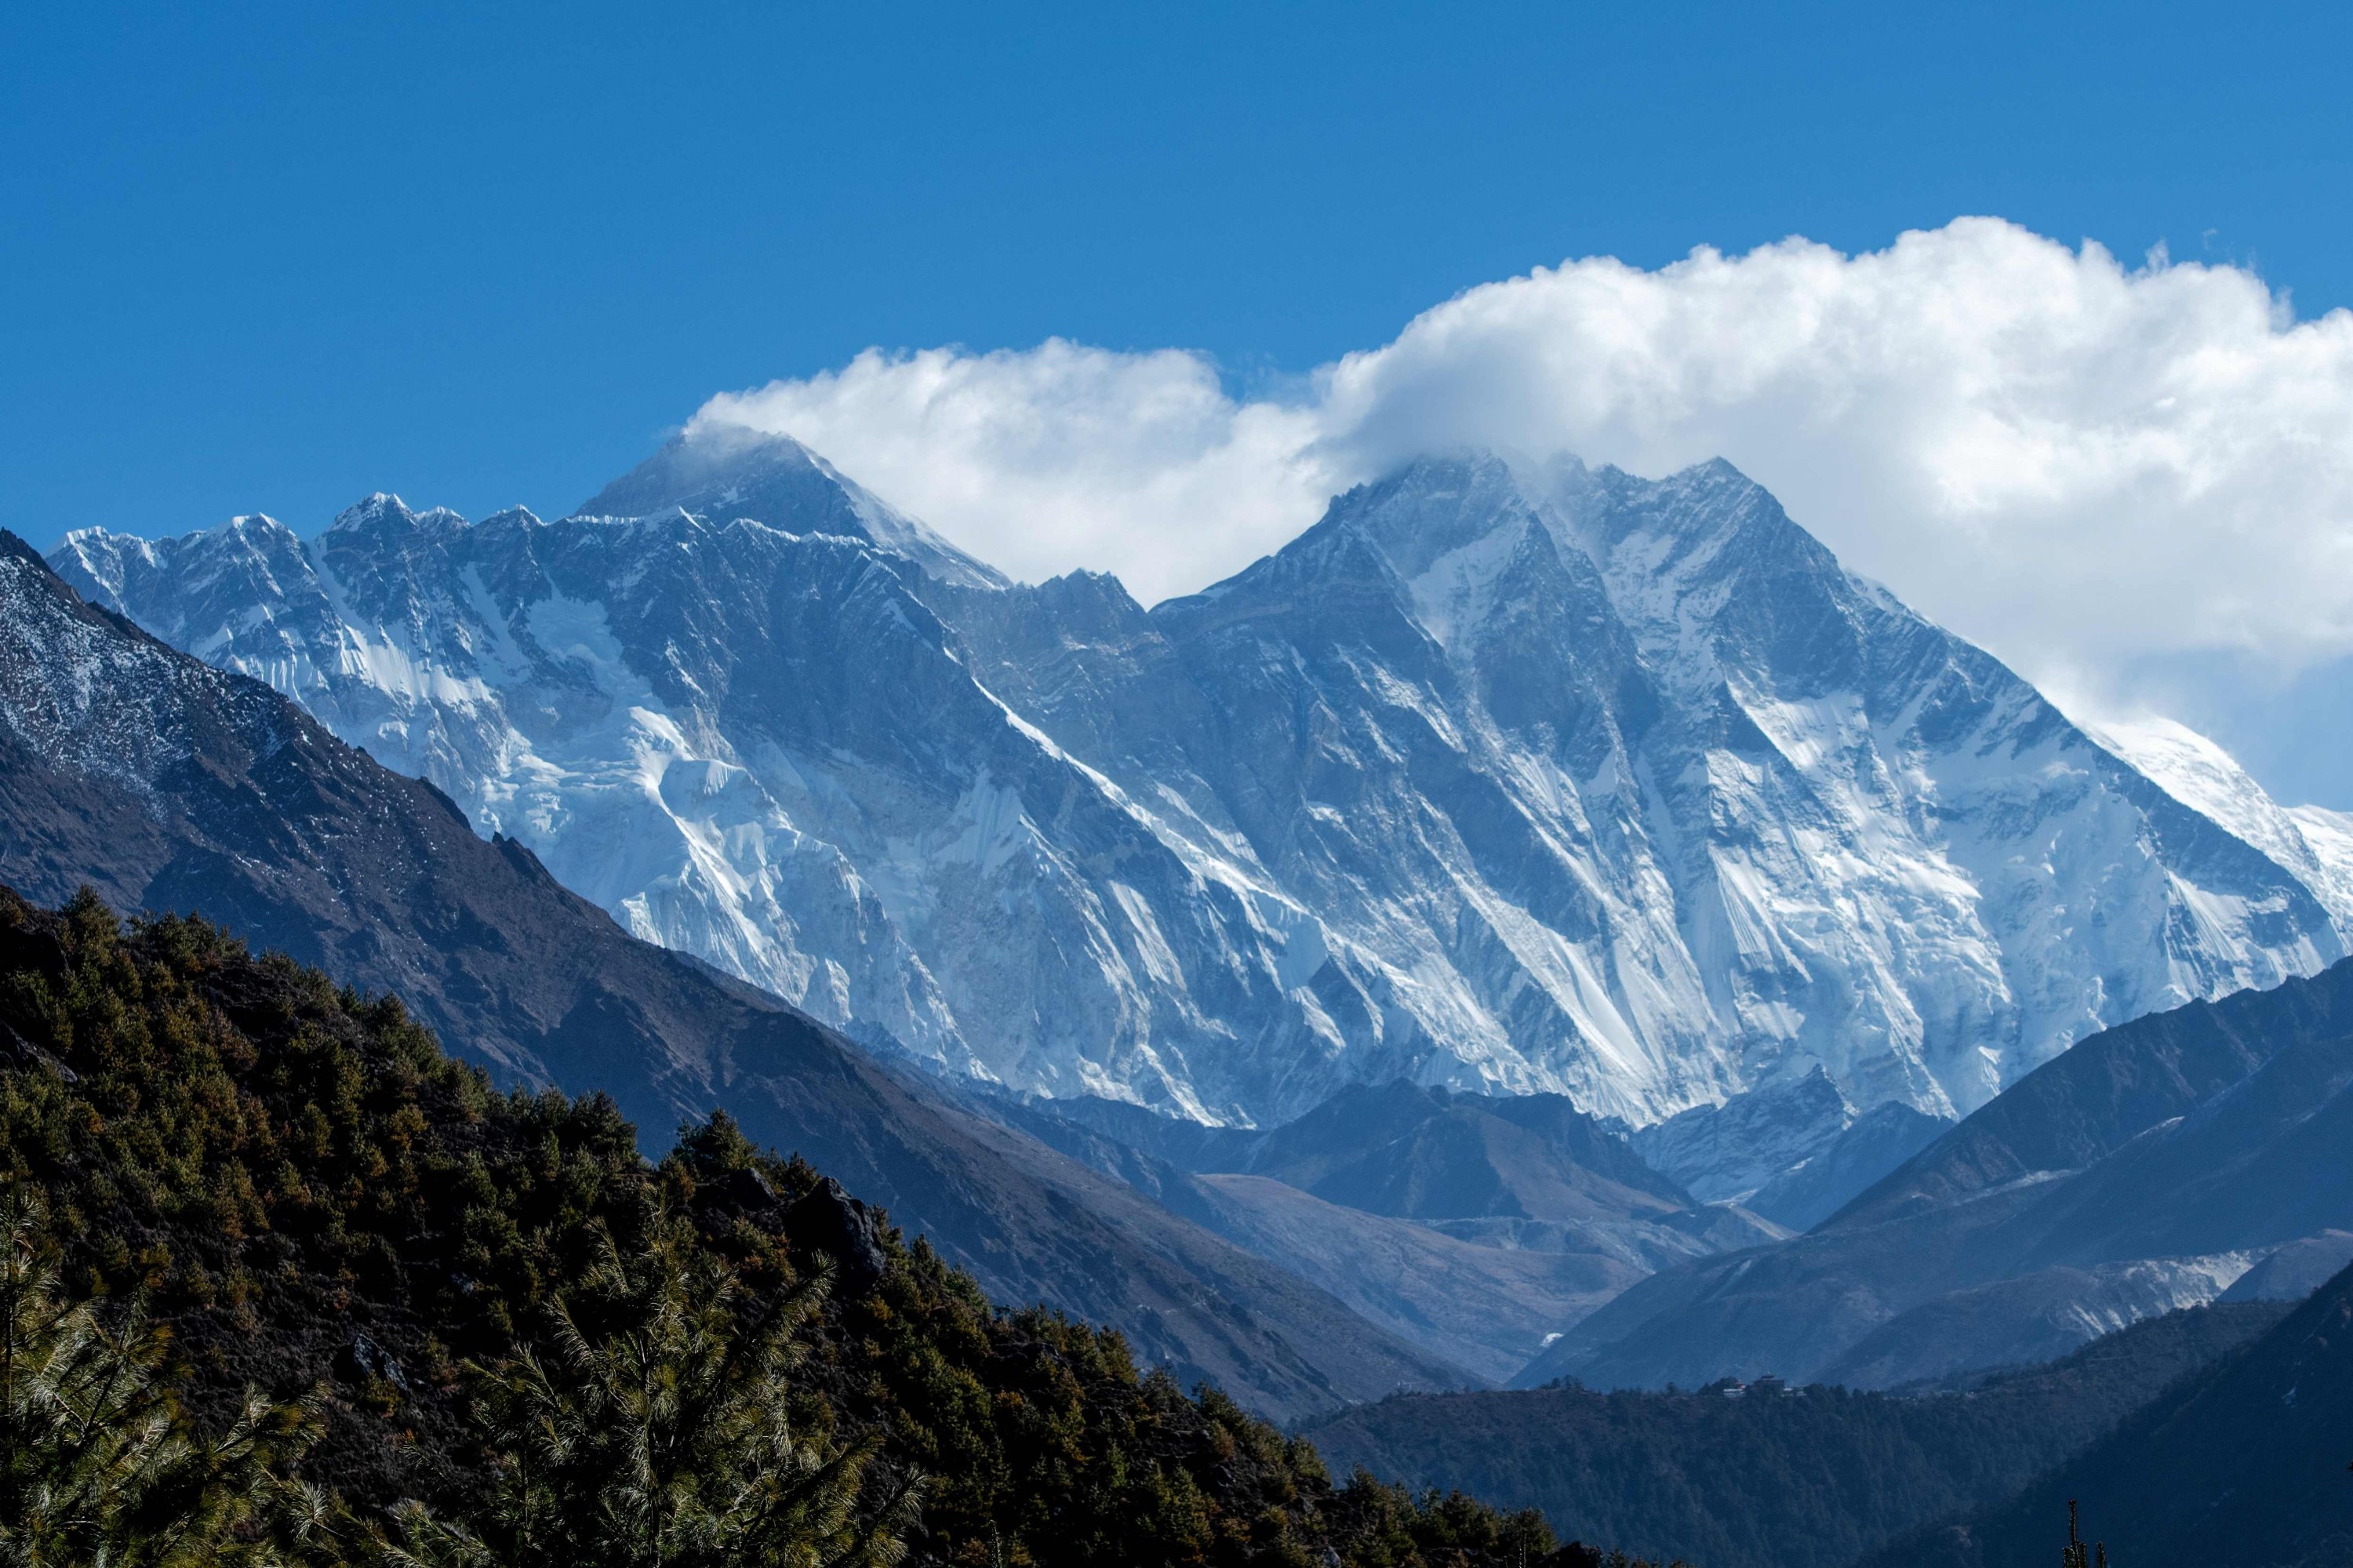 Growth spurt? Mount Everest's height revised to 8,849 meters, China and  Nepal announce | Daily Sabah